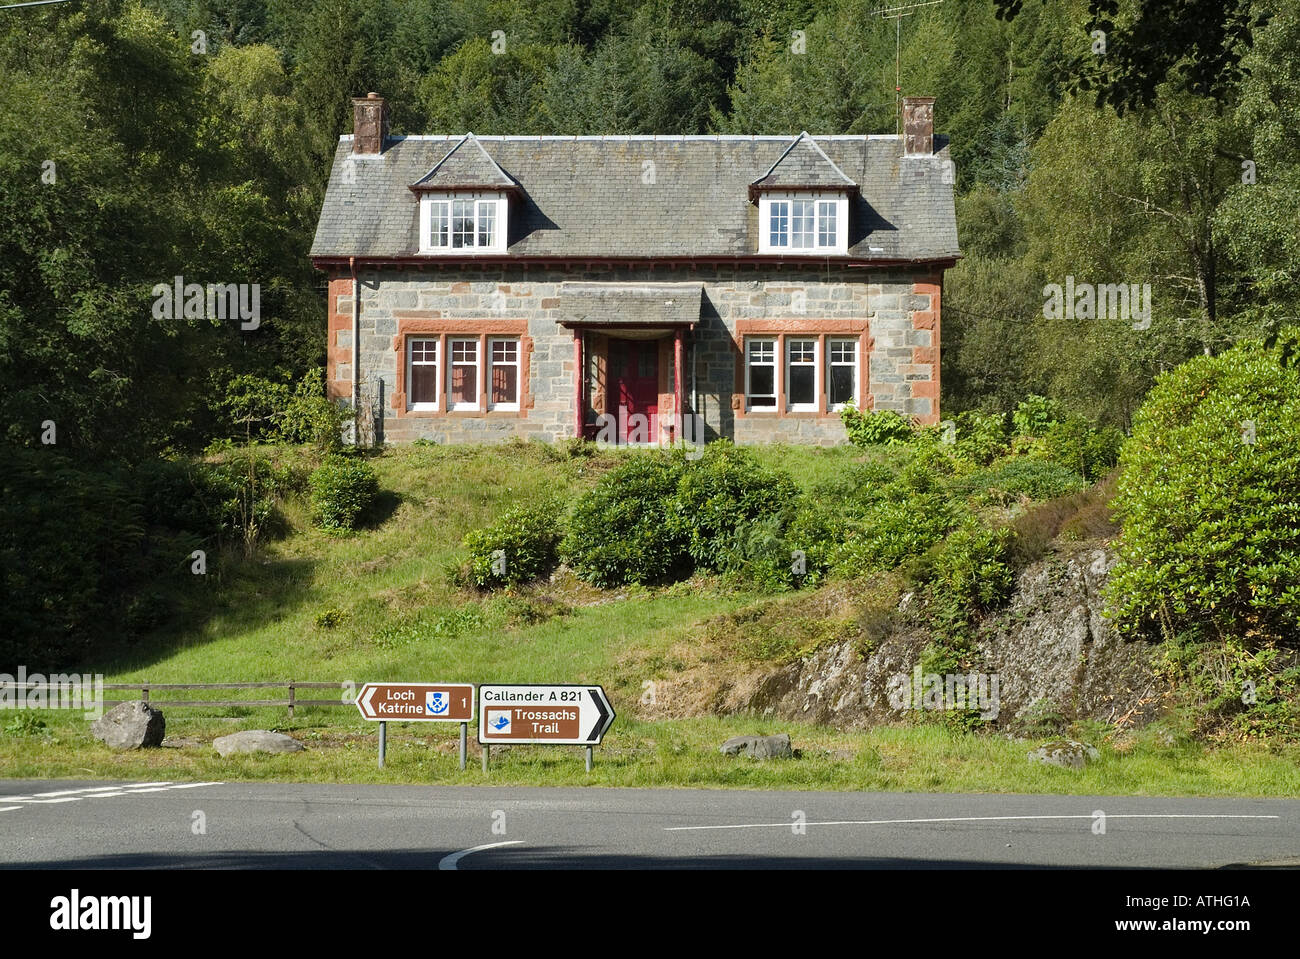 dh  LOCH ACHRAY STIRLINGSHIRE Scottish Trossachs junction and lodge house Queen Elizabeth forest park a821 road sign scotland Stock Photo